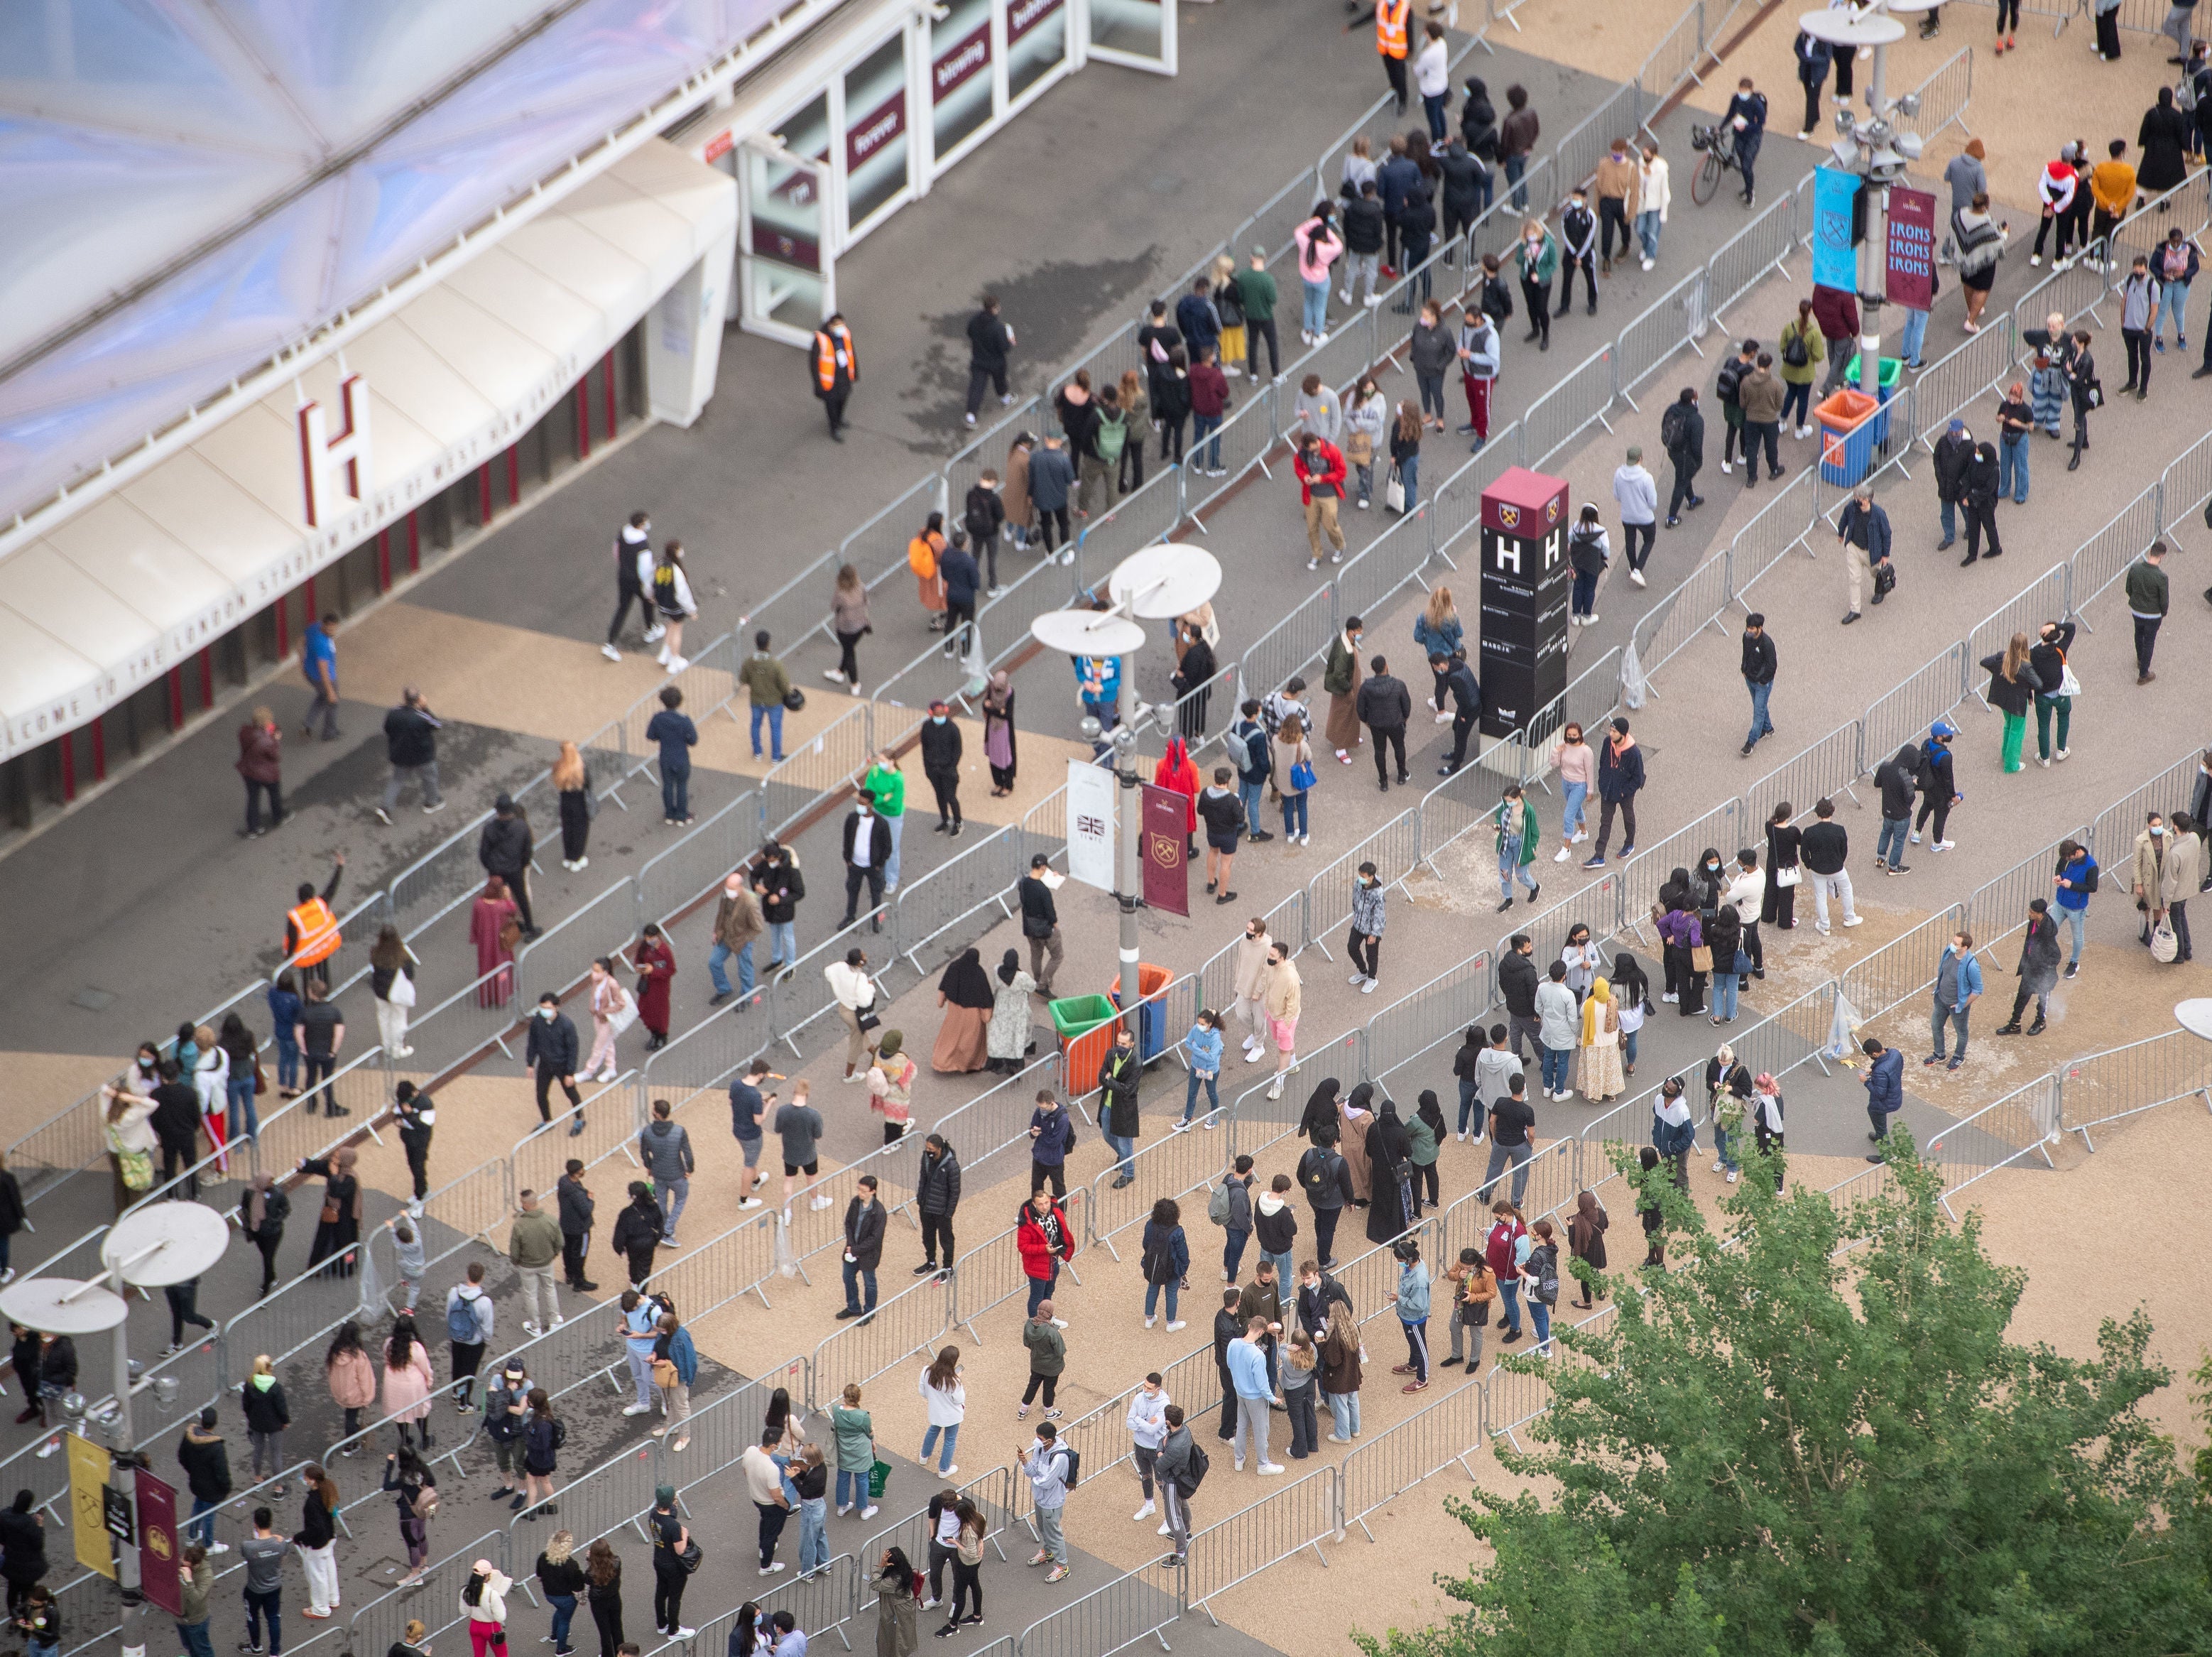 Long queues formed outside an NHS vaccination clinic at West Ham’s London Stadium in Stratford, east London